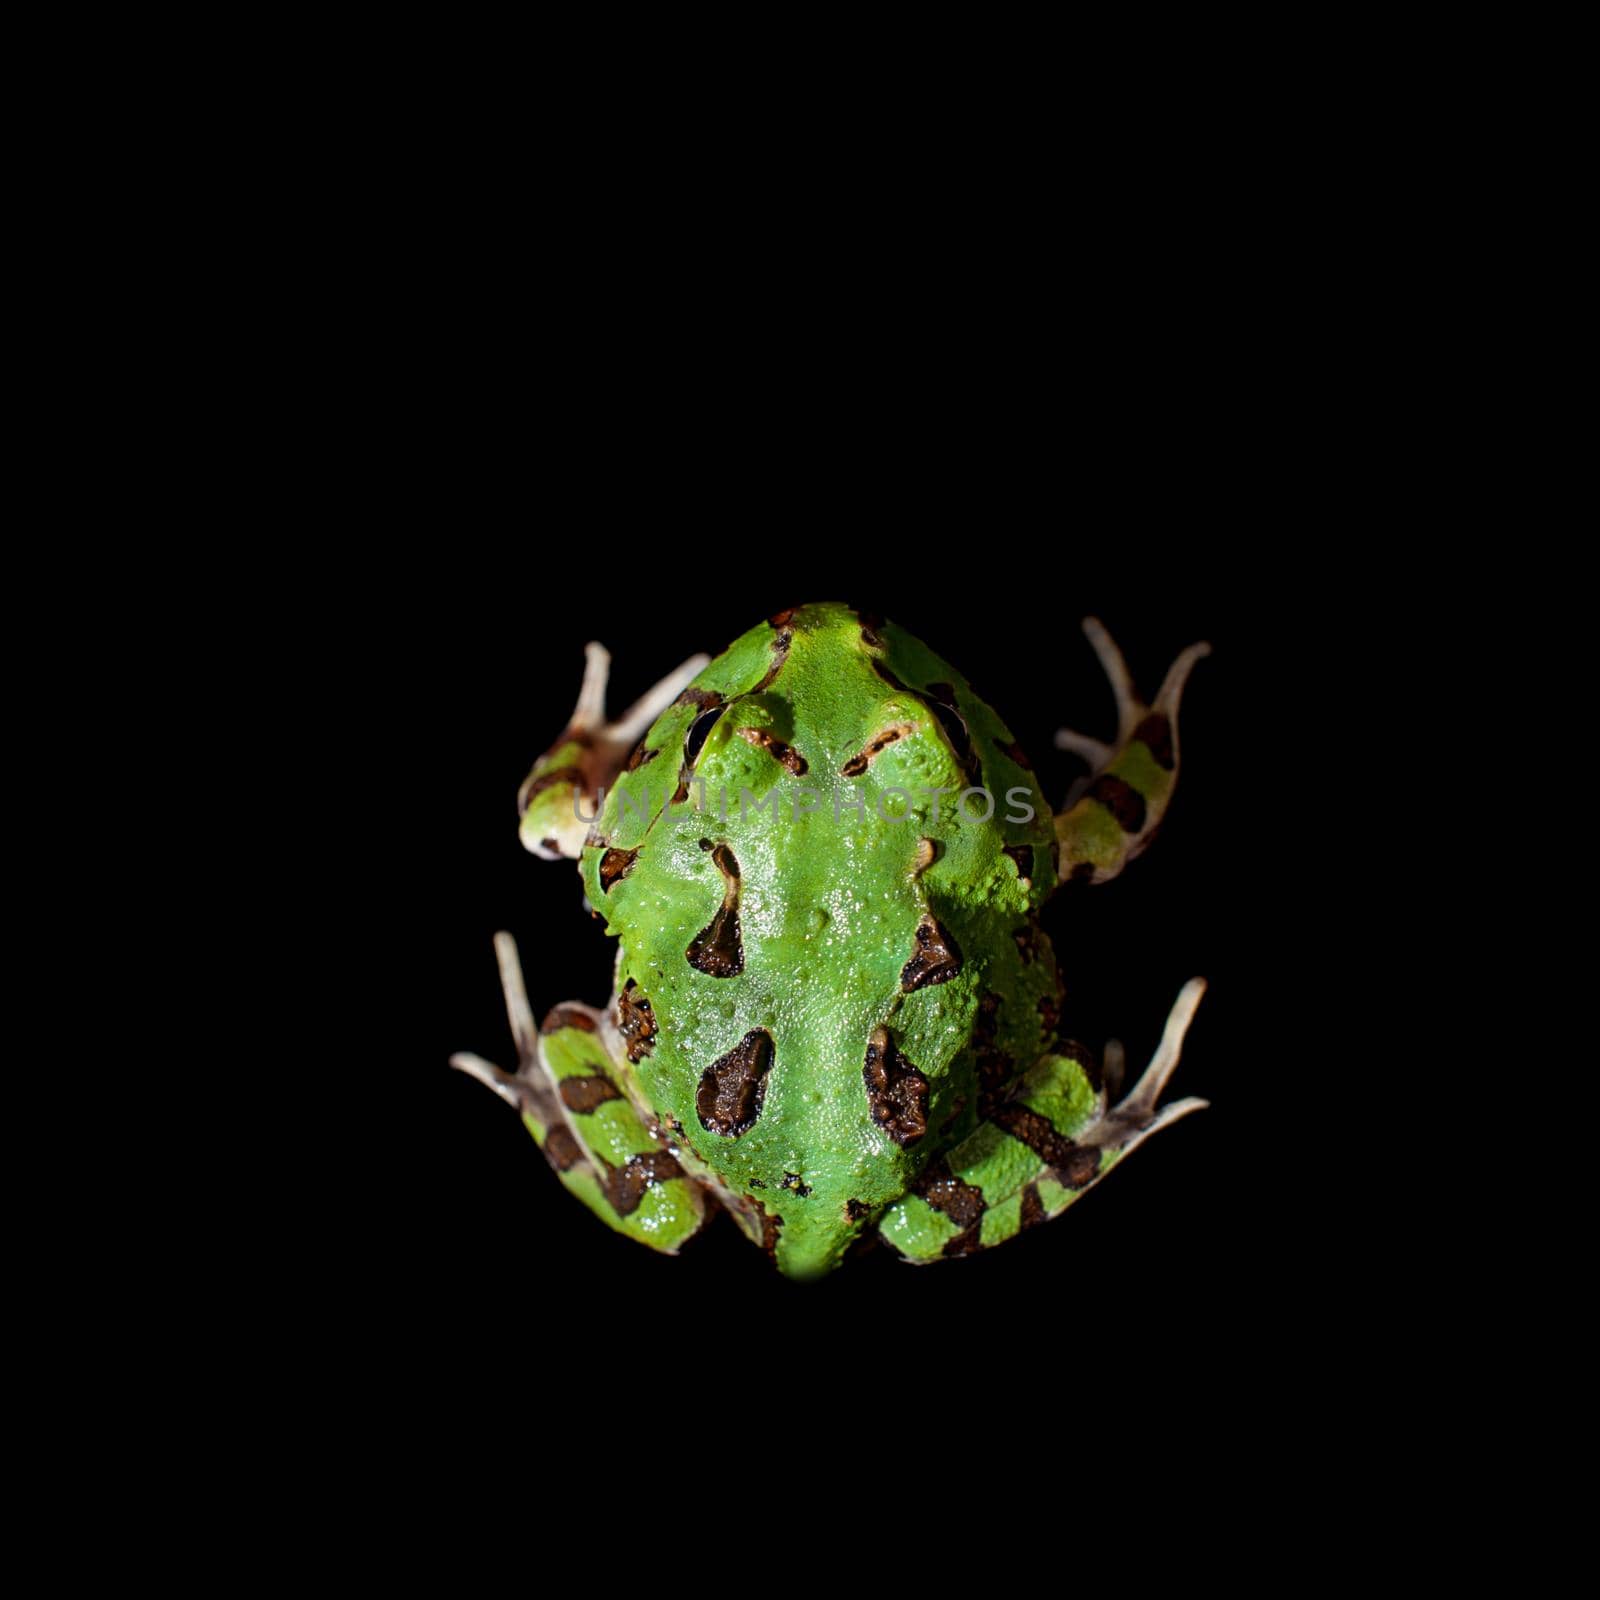 The Brazilian horned frog isolated on black by RosaJay